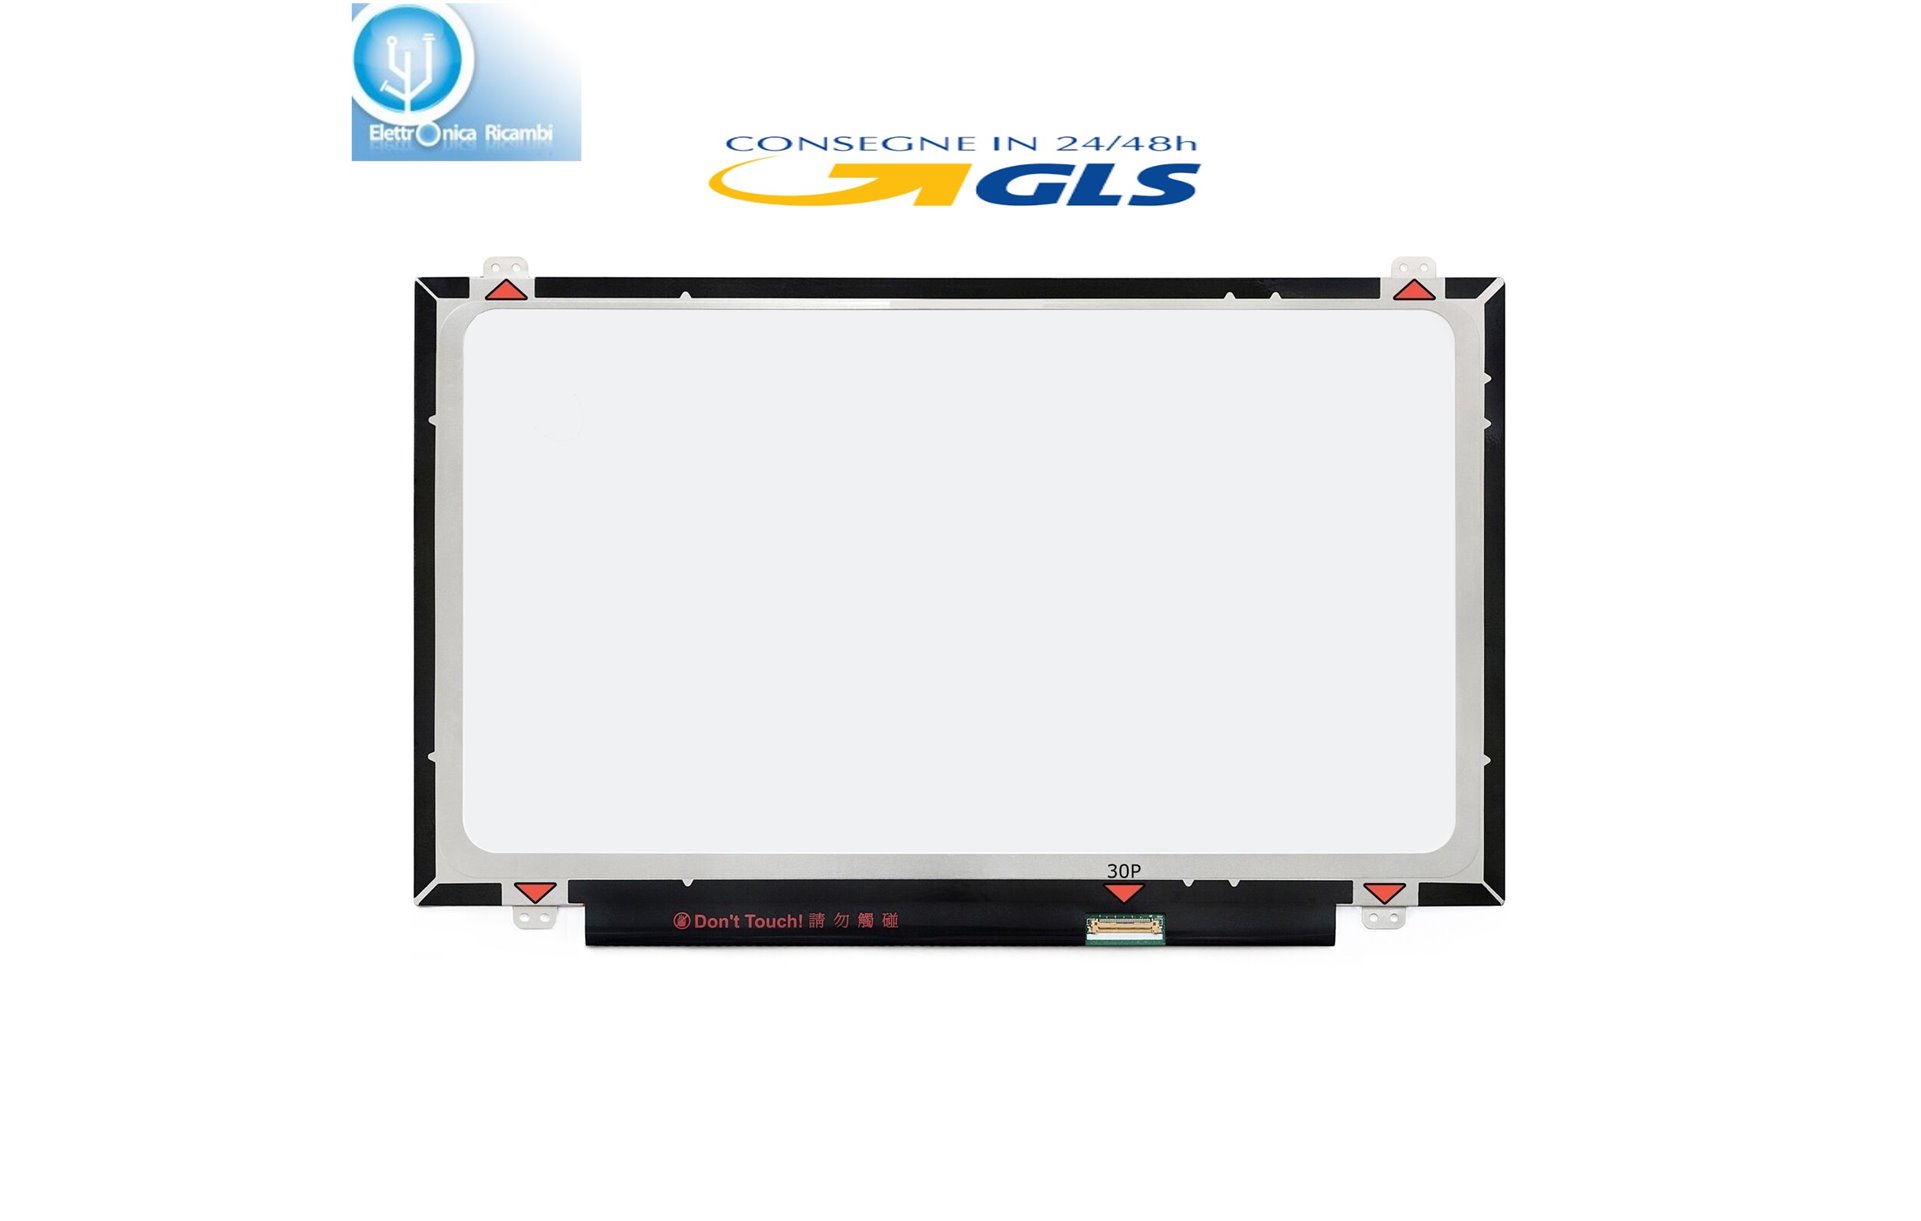 Display LCD Schermo Acer ASPIRE E5-473G SERIES 14.0 LED 30 pin 1366x768